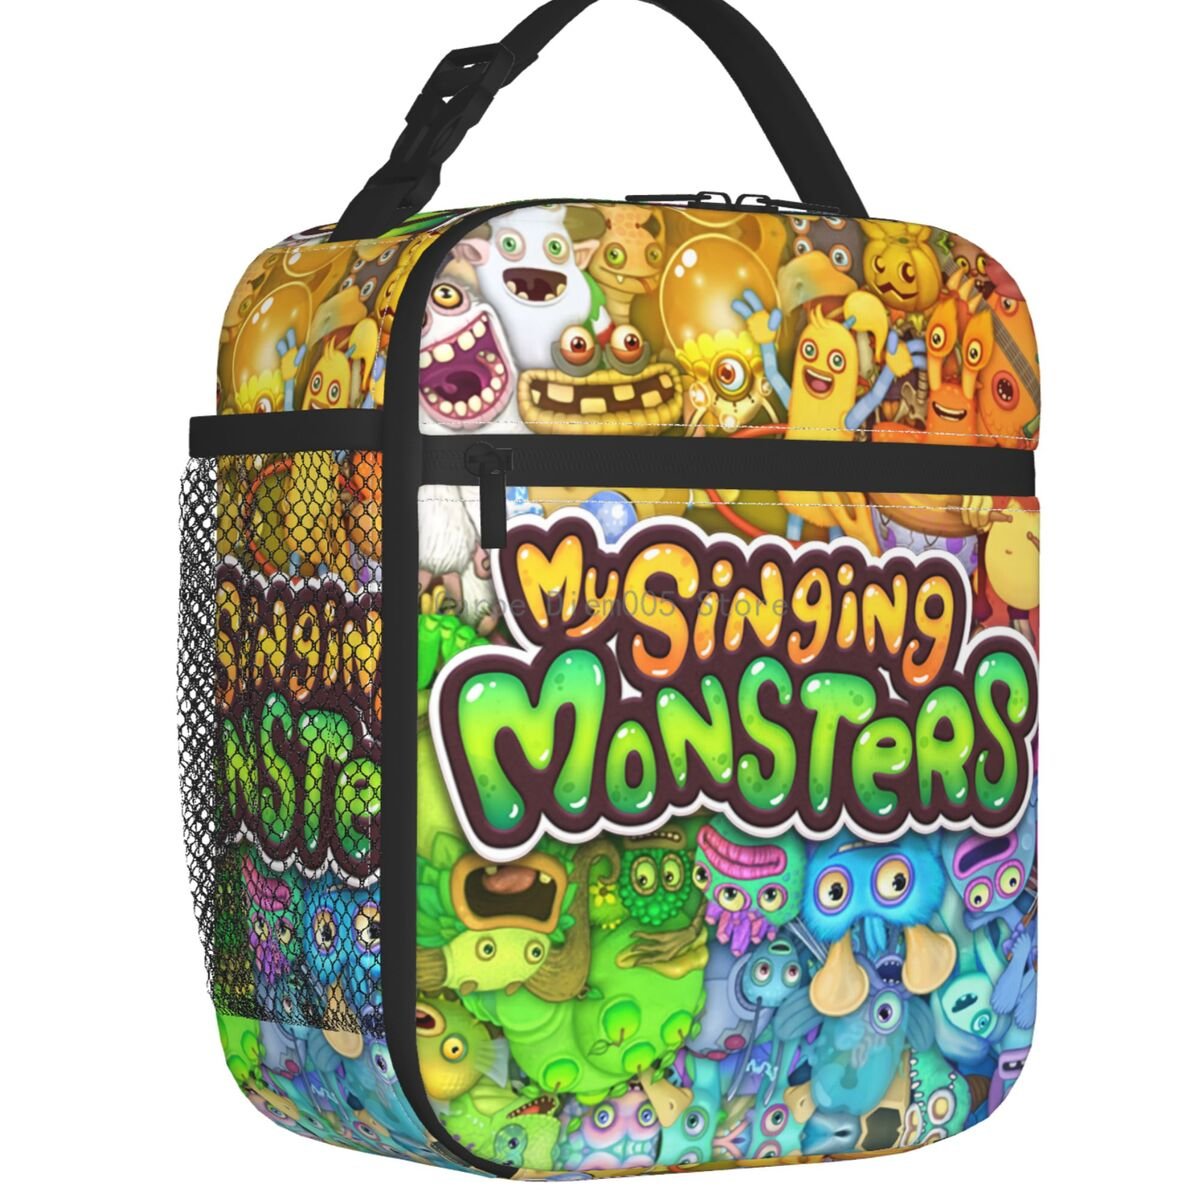 My Singing Monsters Thermal Insulated Lunch Bag Cartoon Anime Game Portable Lunch Container Travel Multifunction Food - My Singing Monsters Plush